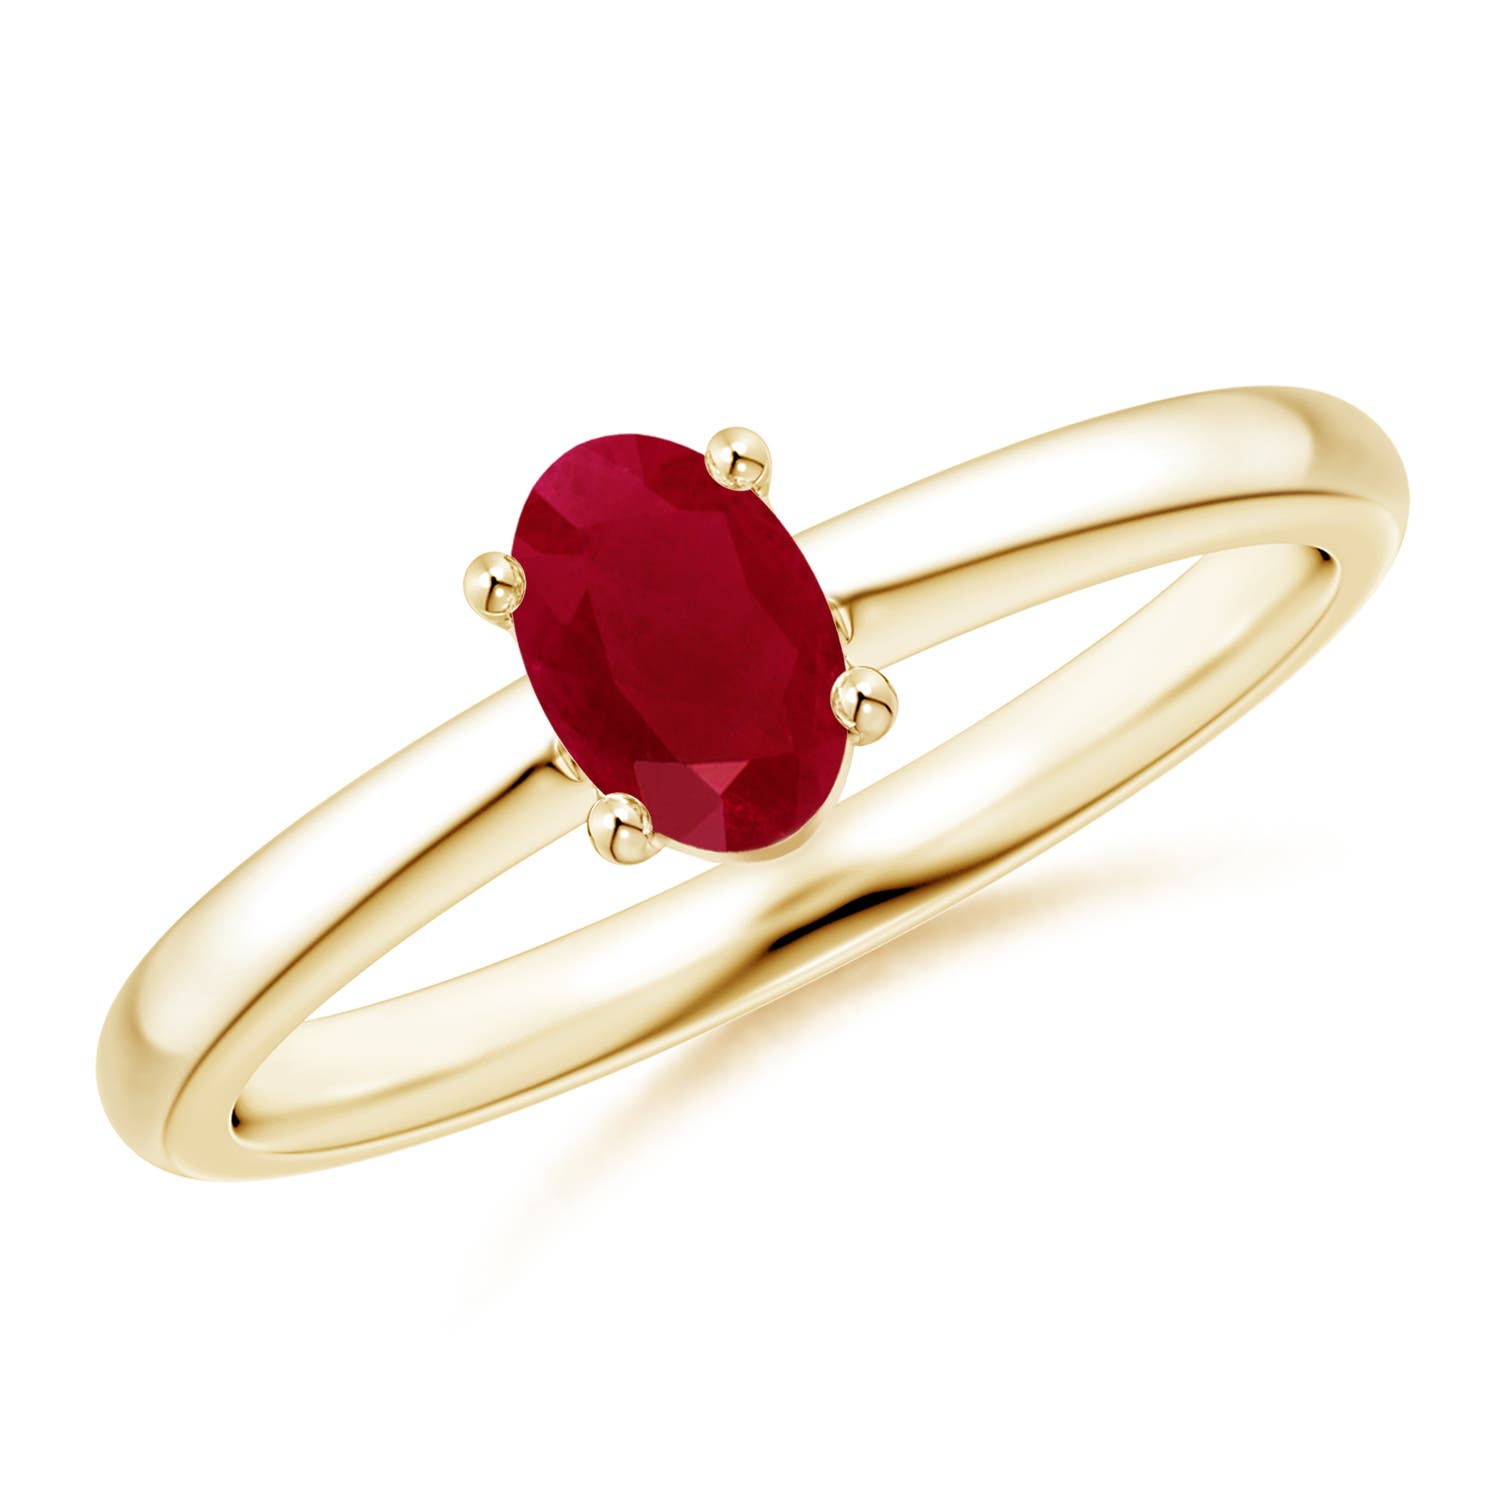 AA - Ruby / 0.6 CT / 14 KT Yellow Gold